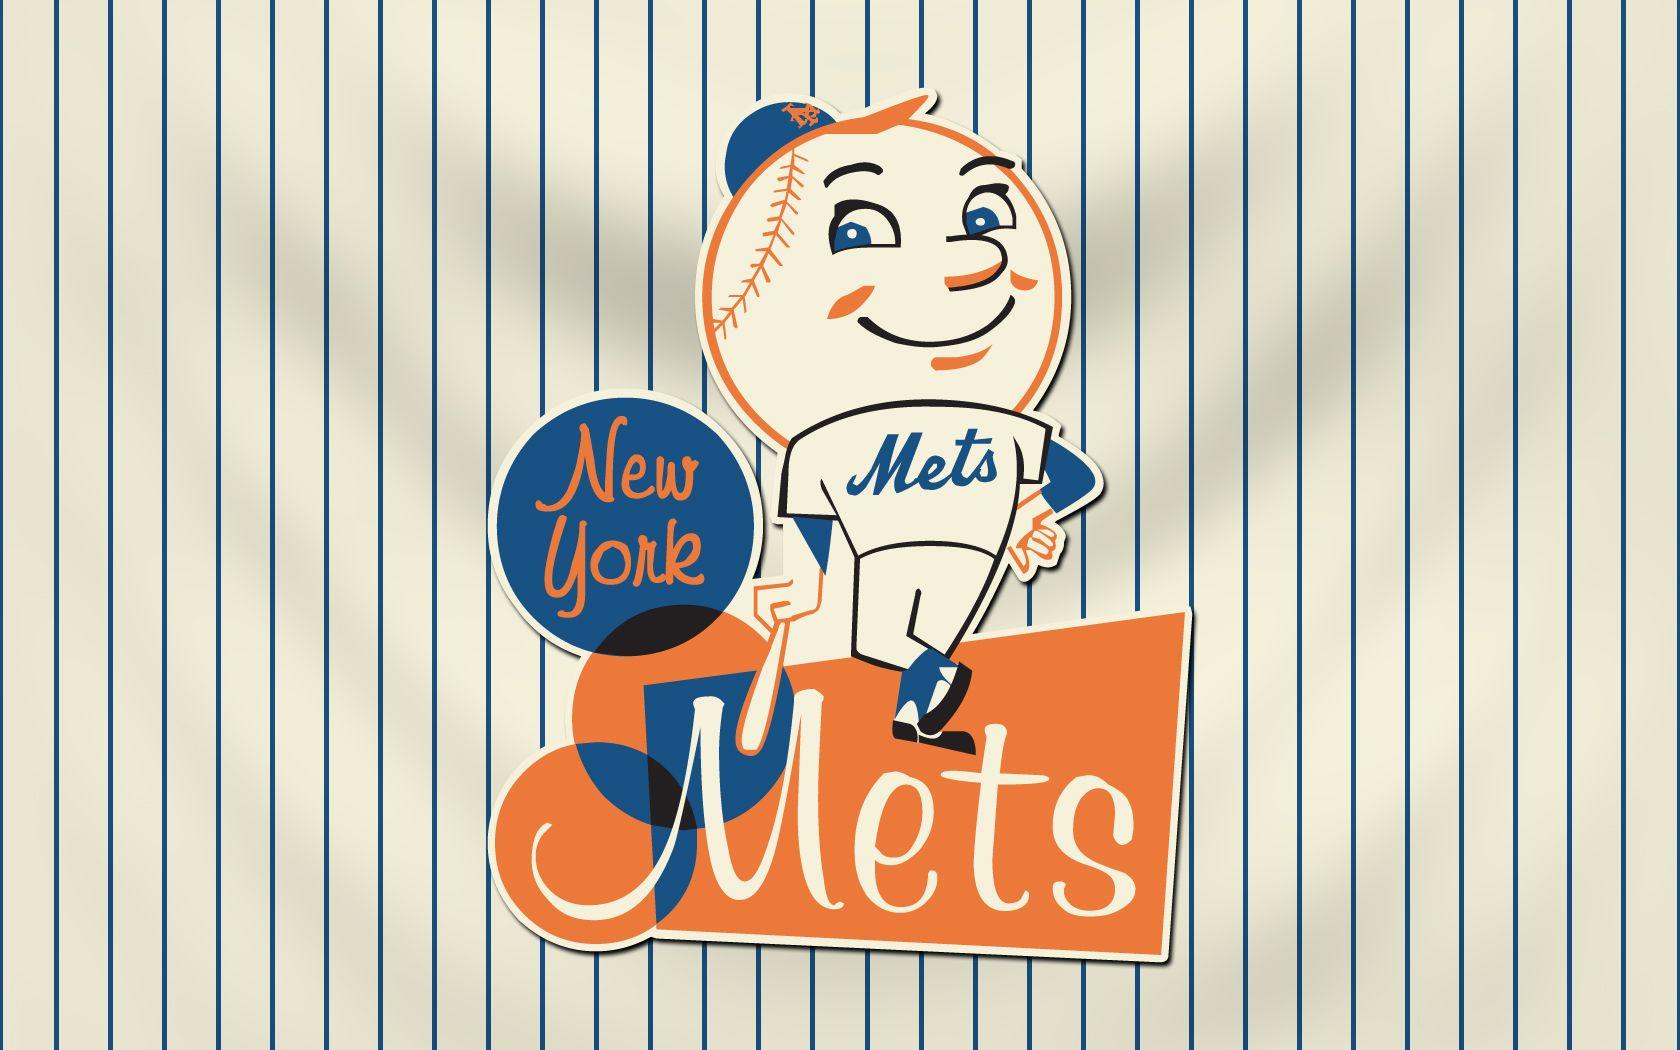 Prove Your Fandom With New York Mets Browser Themes and Wallpapers.